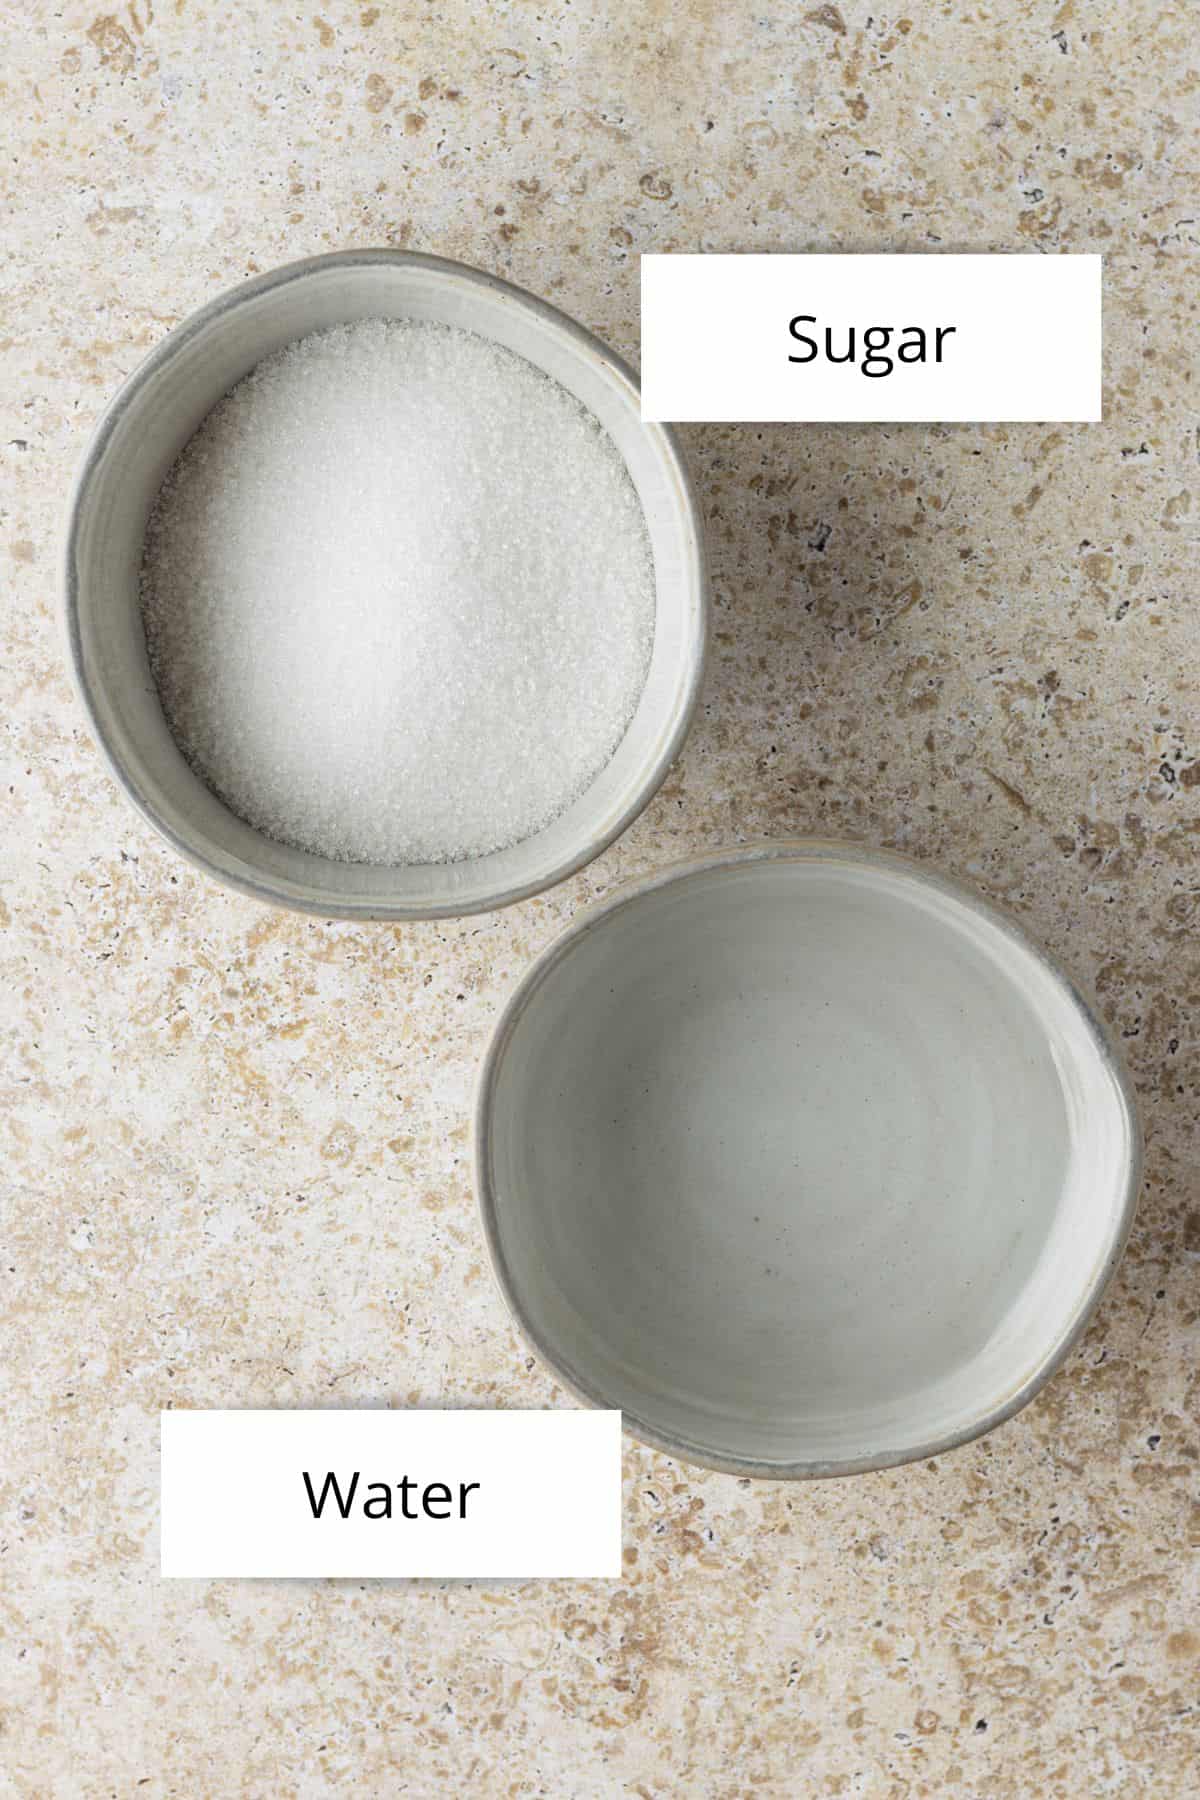 Overhead view of a bowl of cane sugar and another bowl of water.